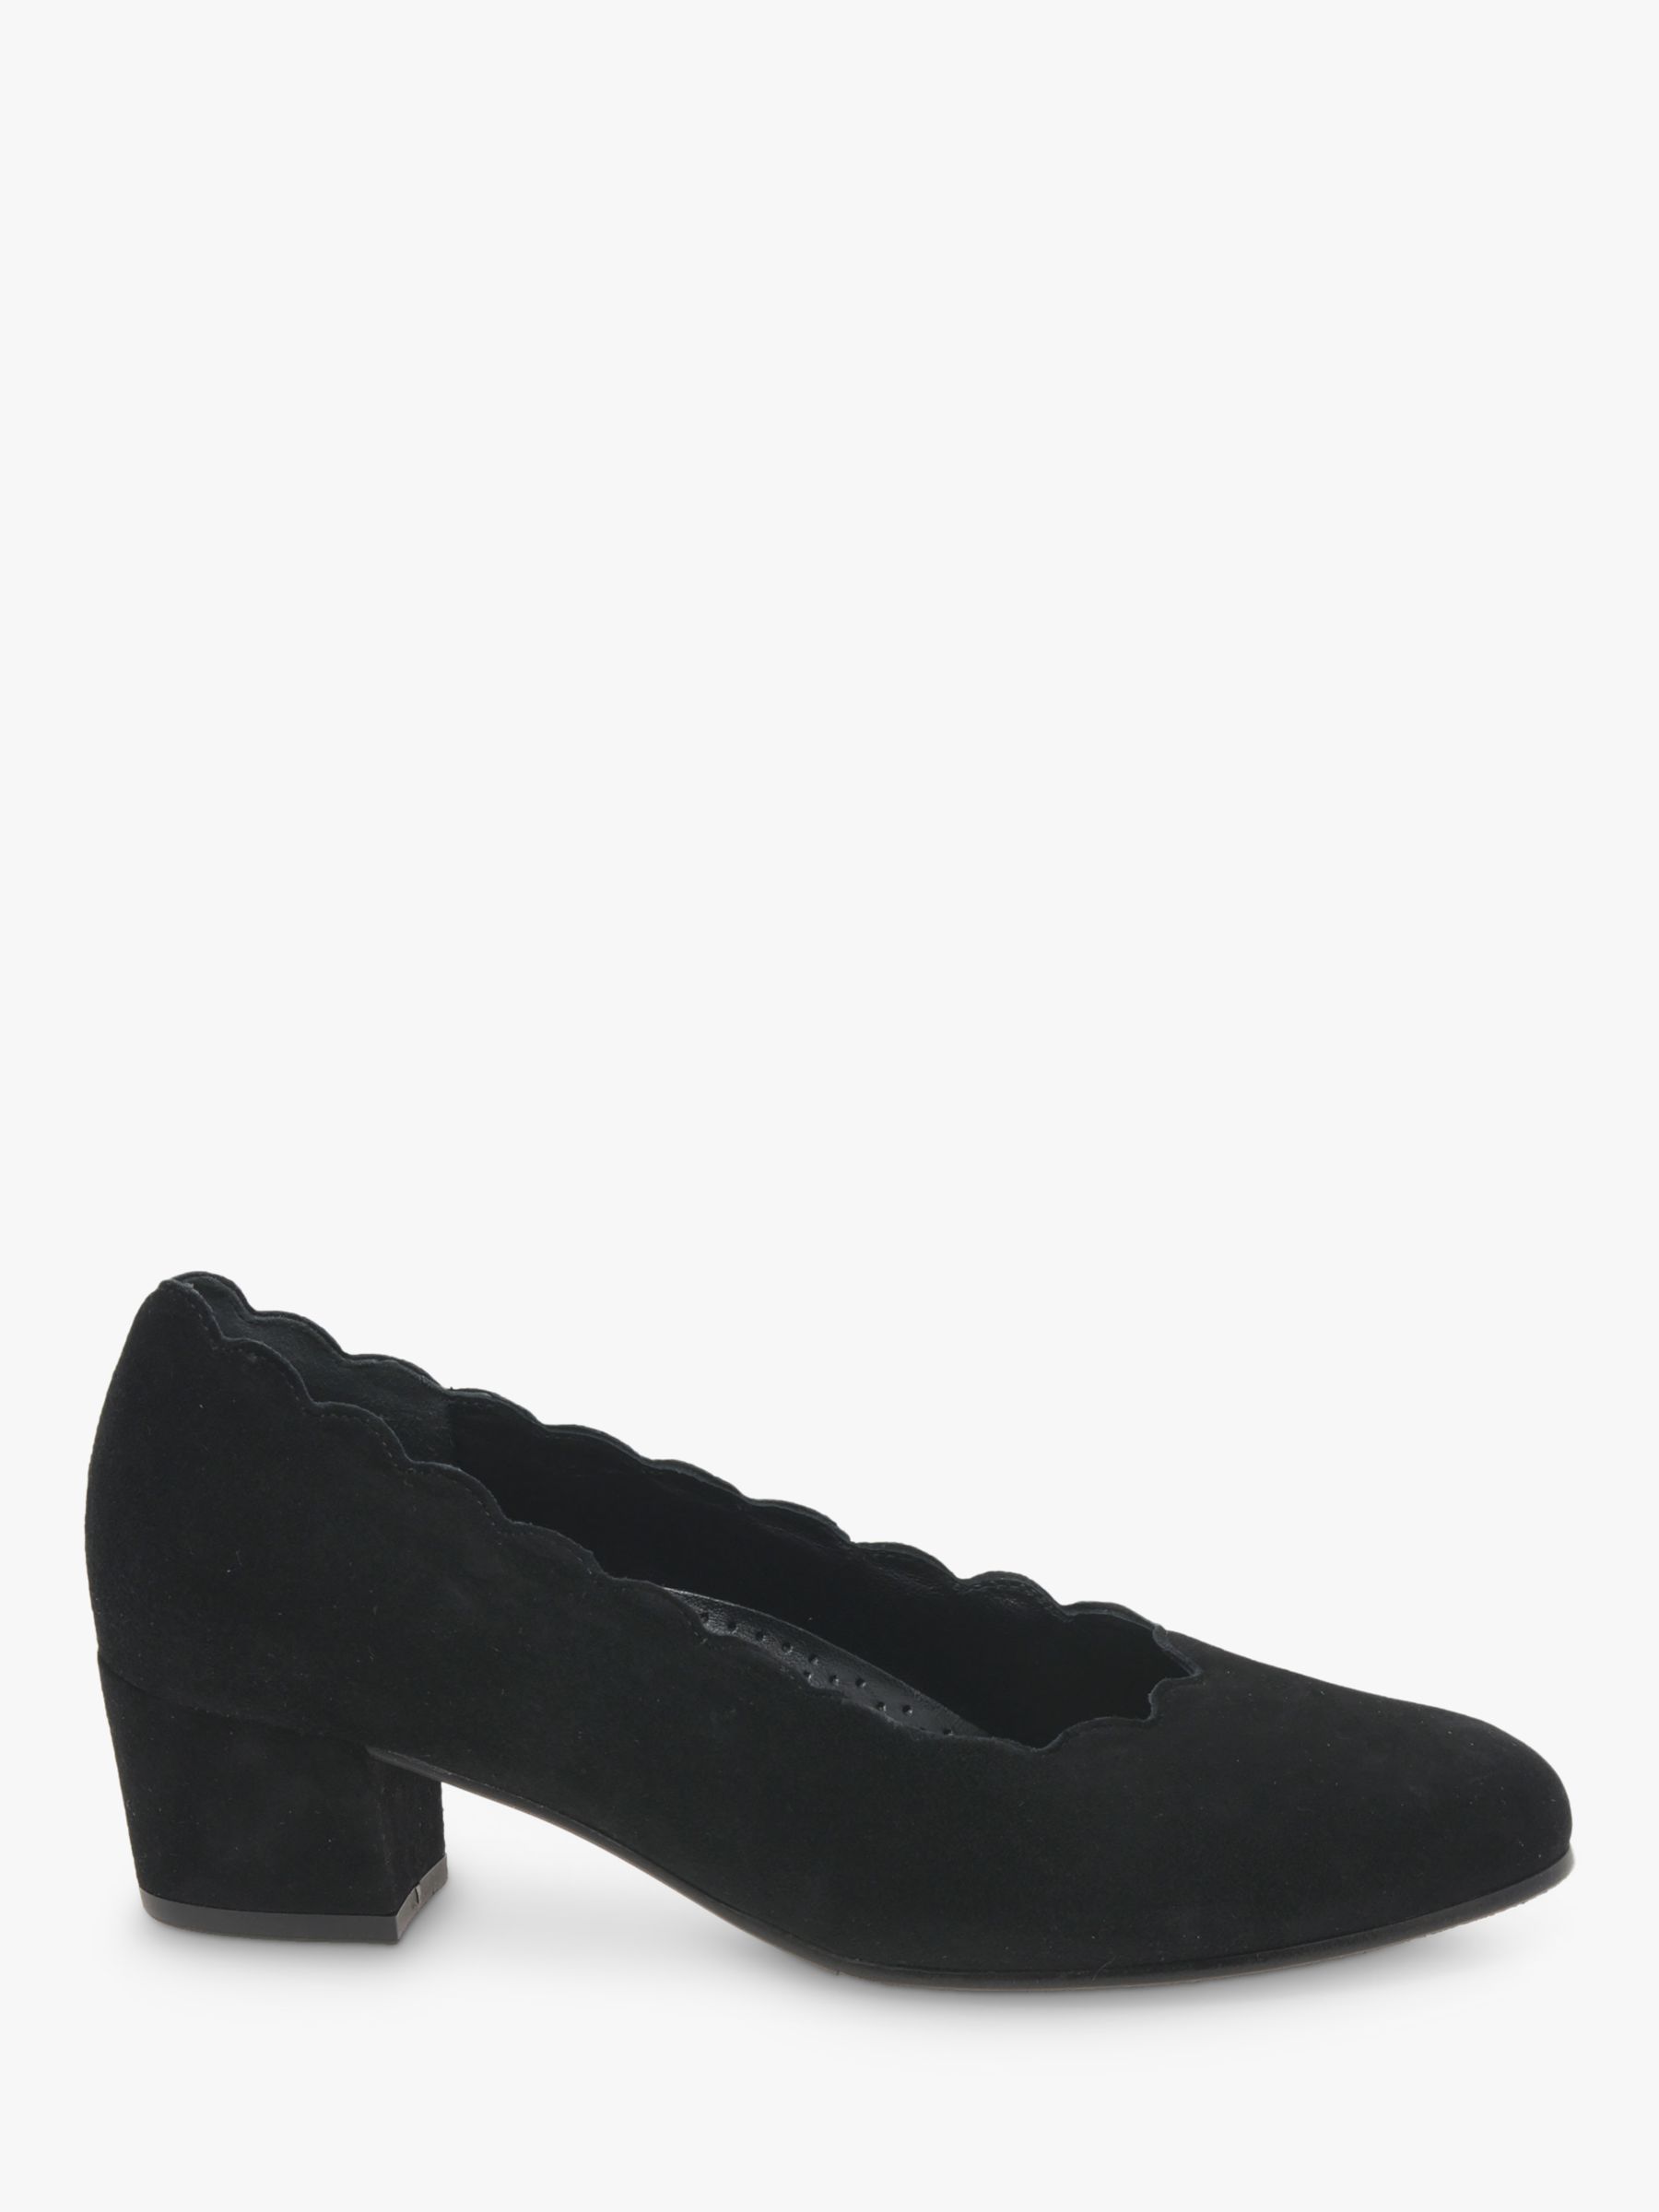 Gabor Wide Gigi Scallop Edge Suede Heeled Court Shoes, Black at John Lewis Partners